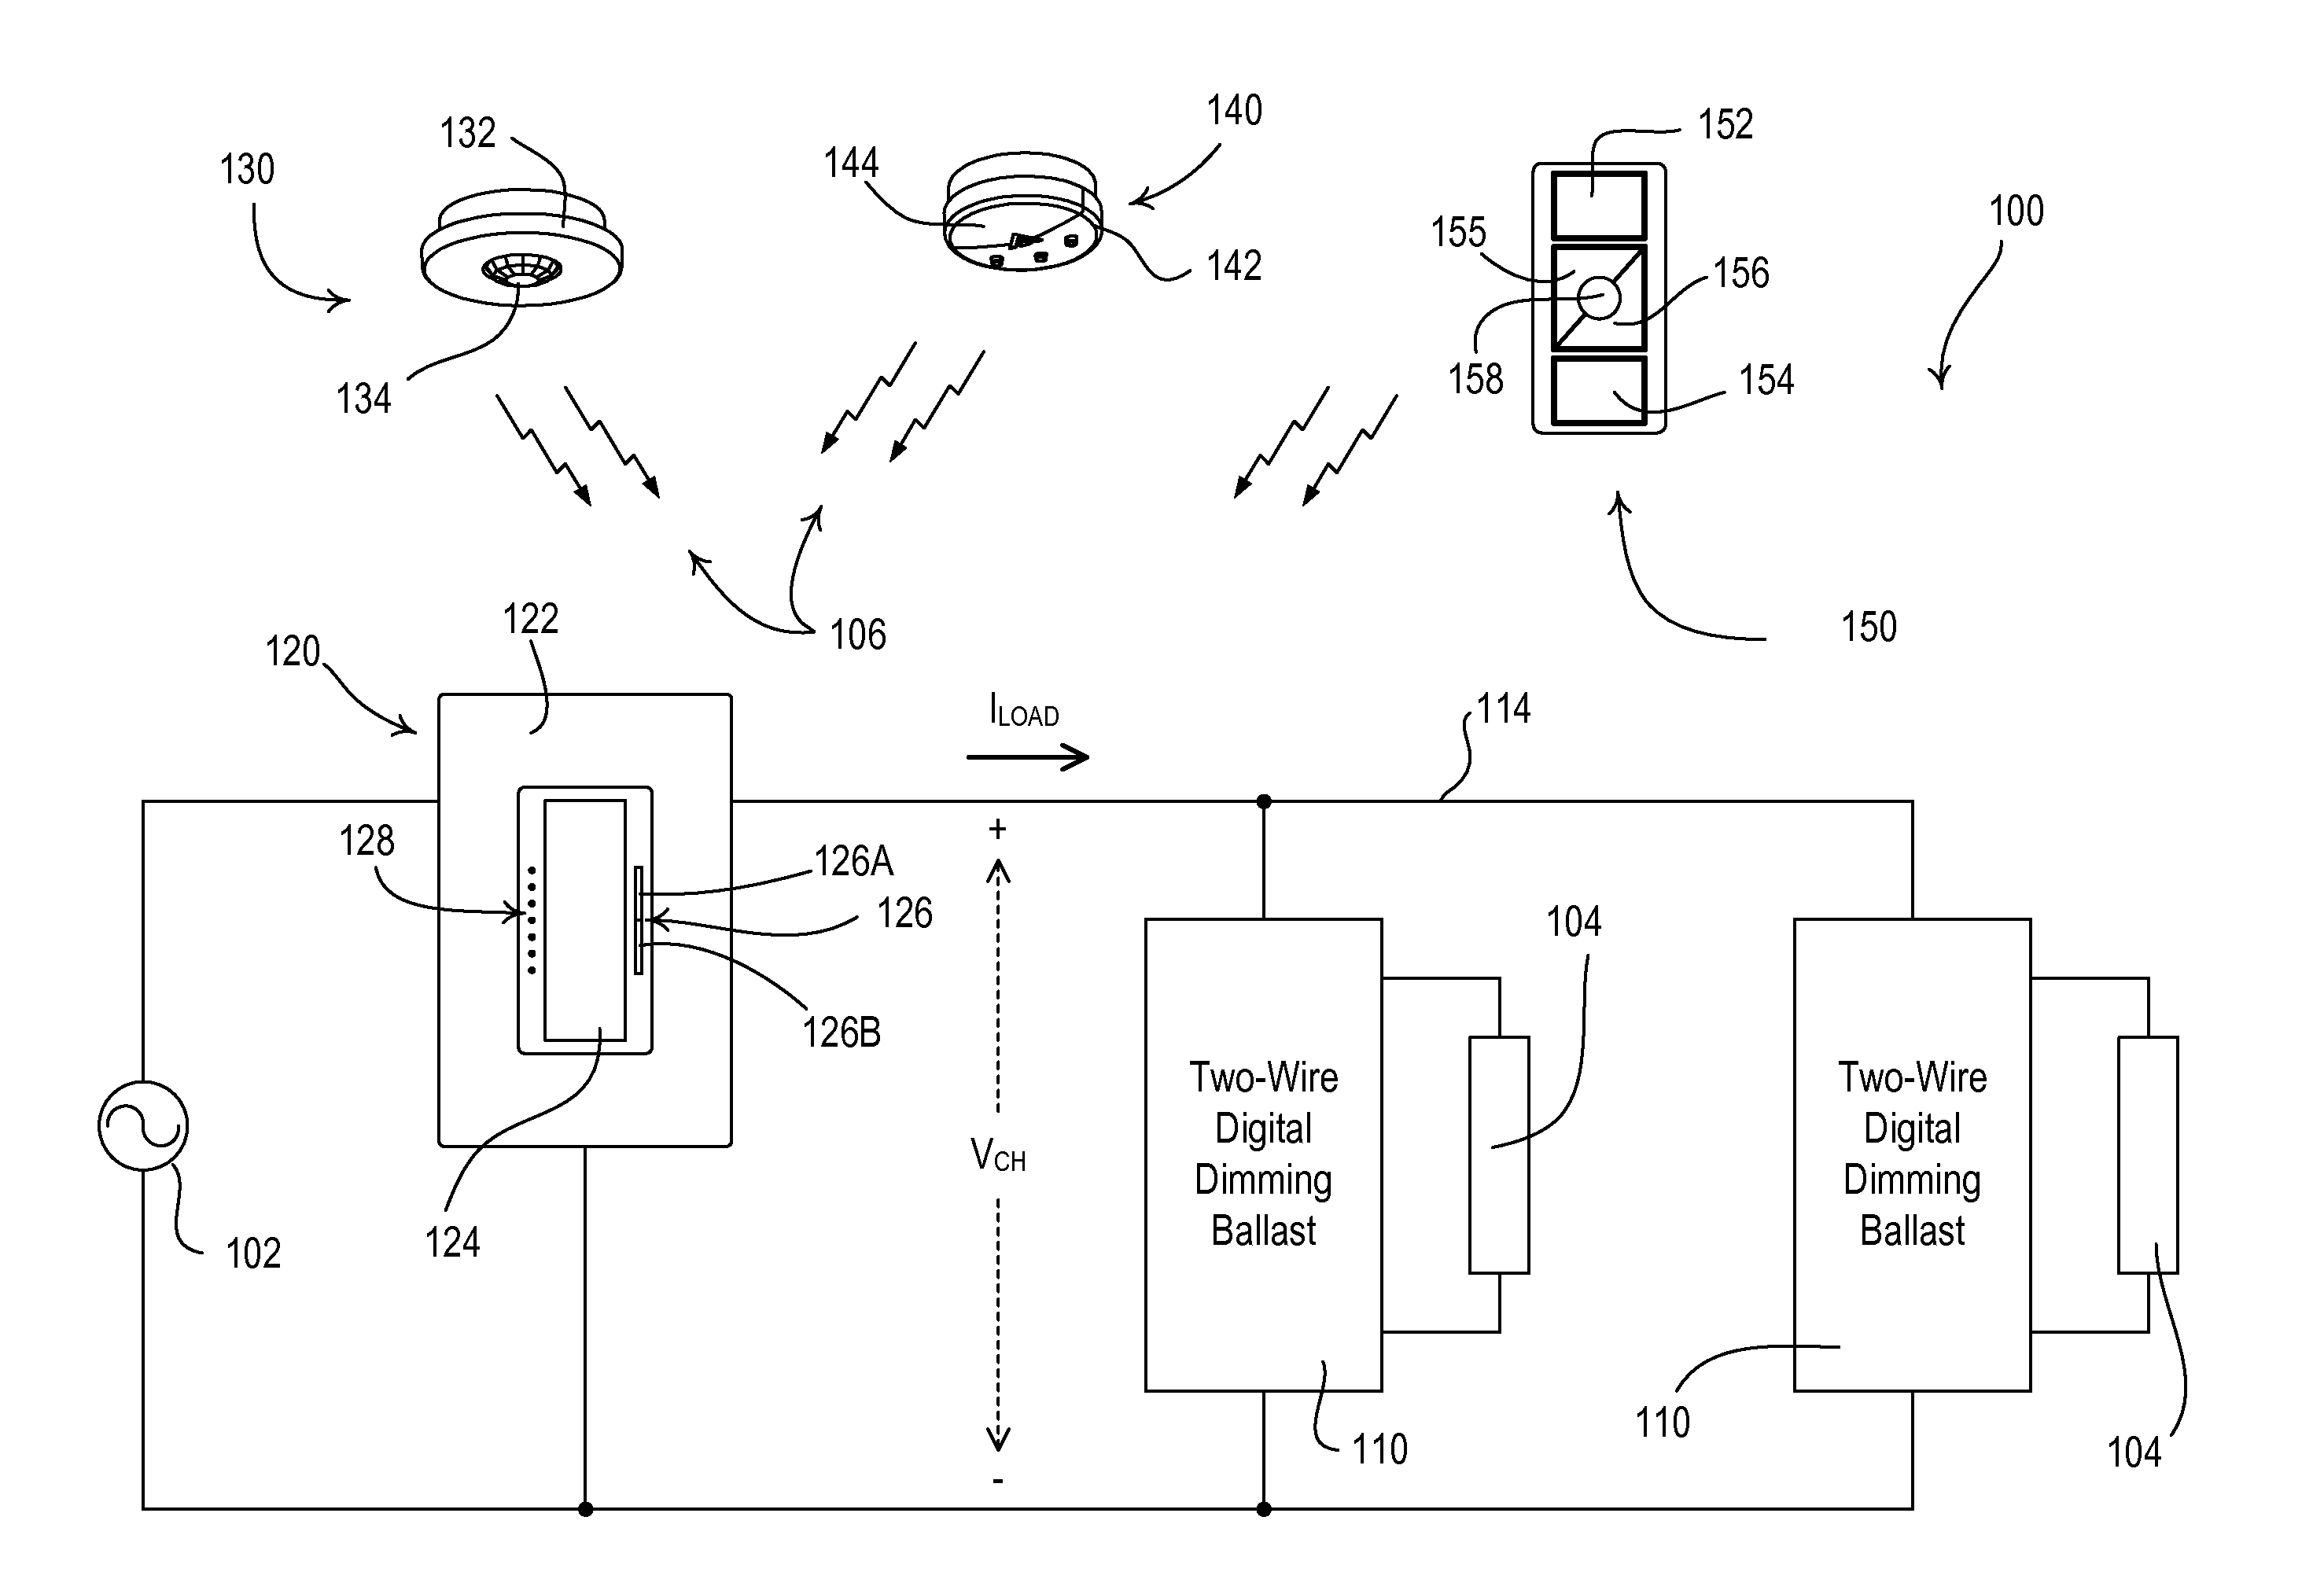 Digital load control system providing power and communication via existing power wiring